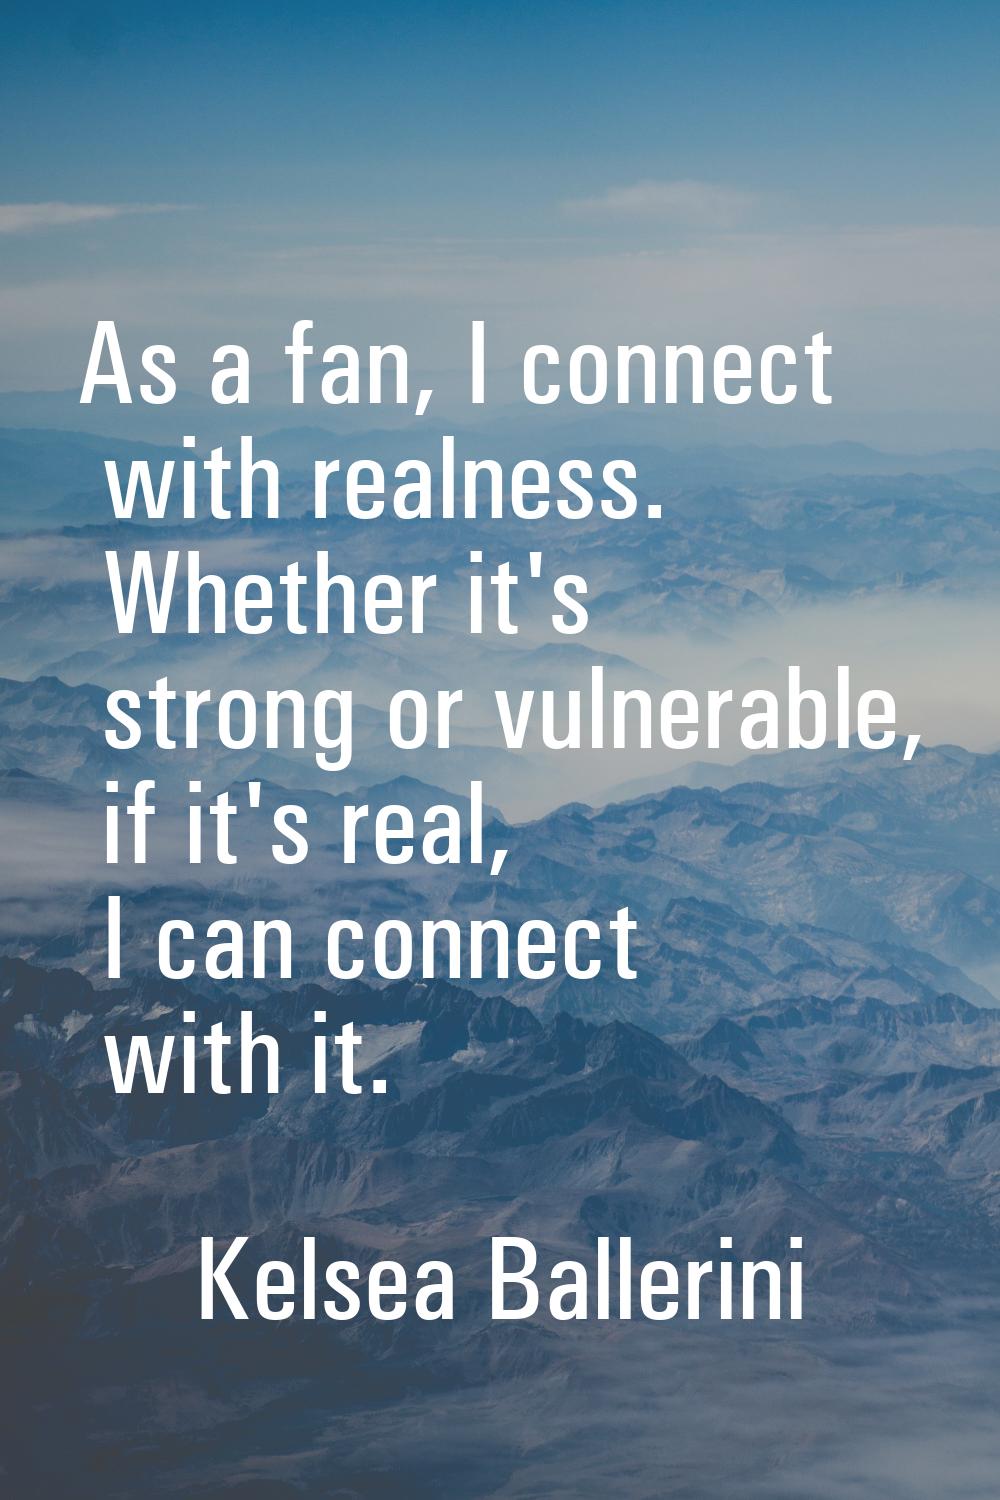 As a fan, I connect with realness. Whether it's strong or vulnerable, if it's real, I can connect w